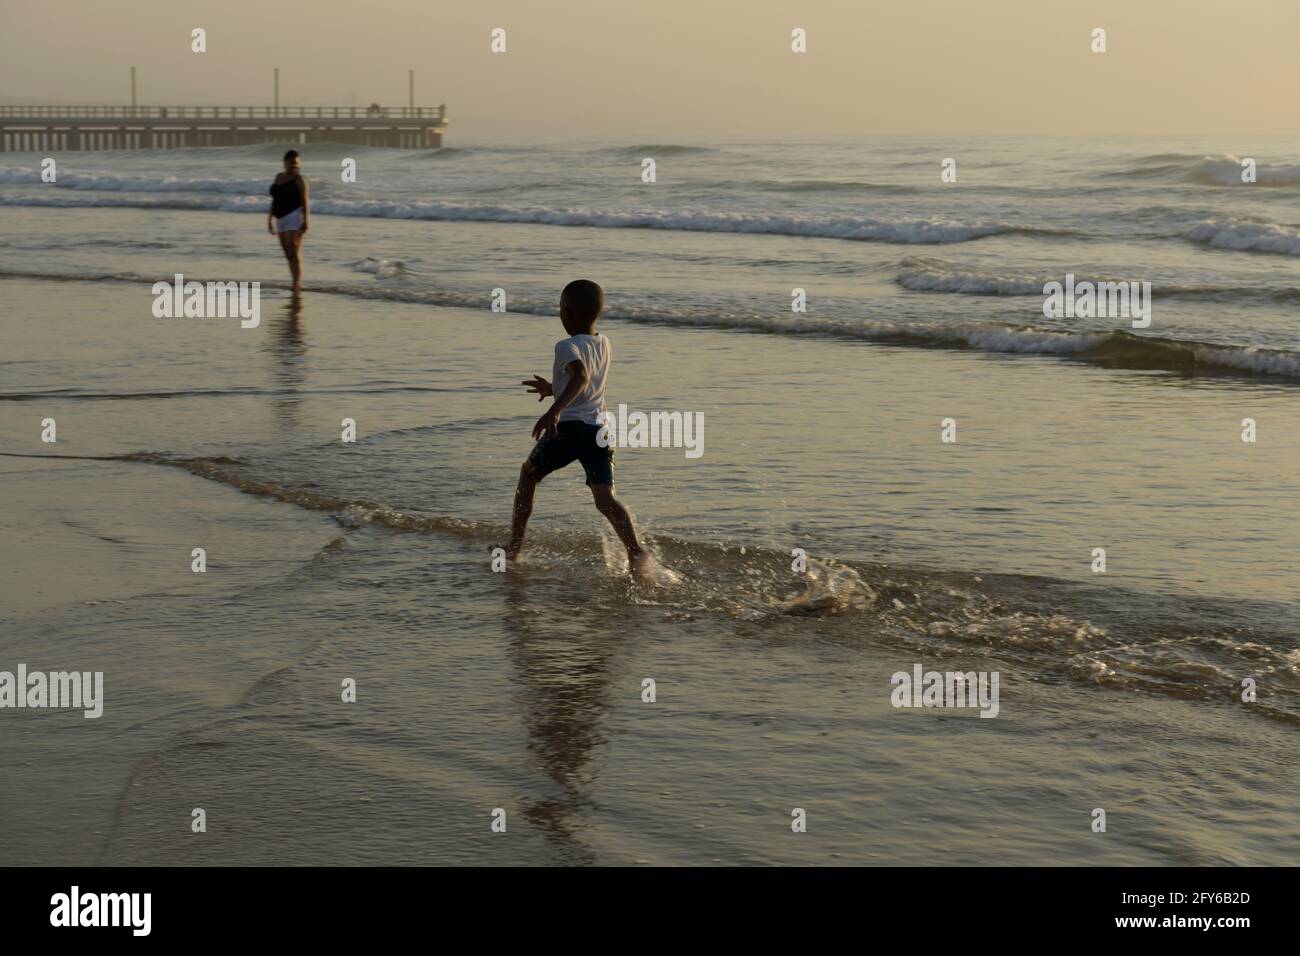 Boy on beach vacation running in water, play, seaside holiday, beautiful landscape, Durban waterfront, South Africa, child, joy, motion blur, happy Stock Photo